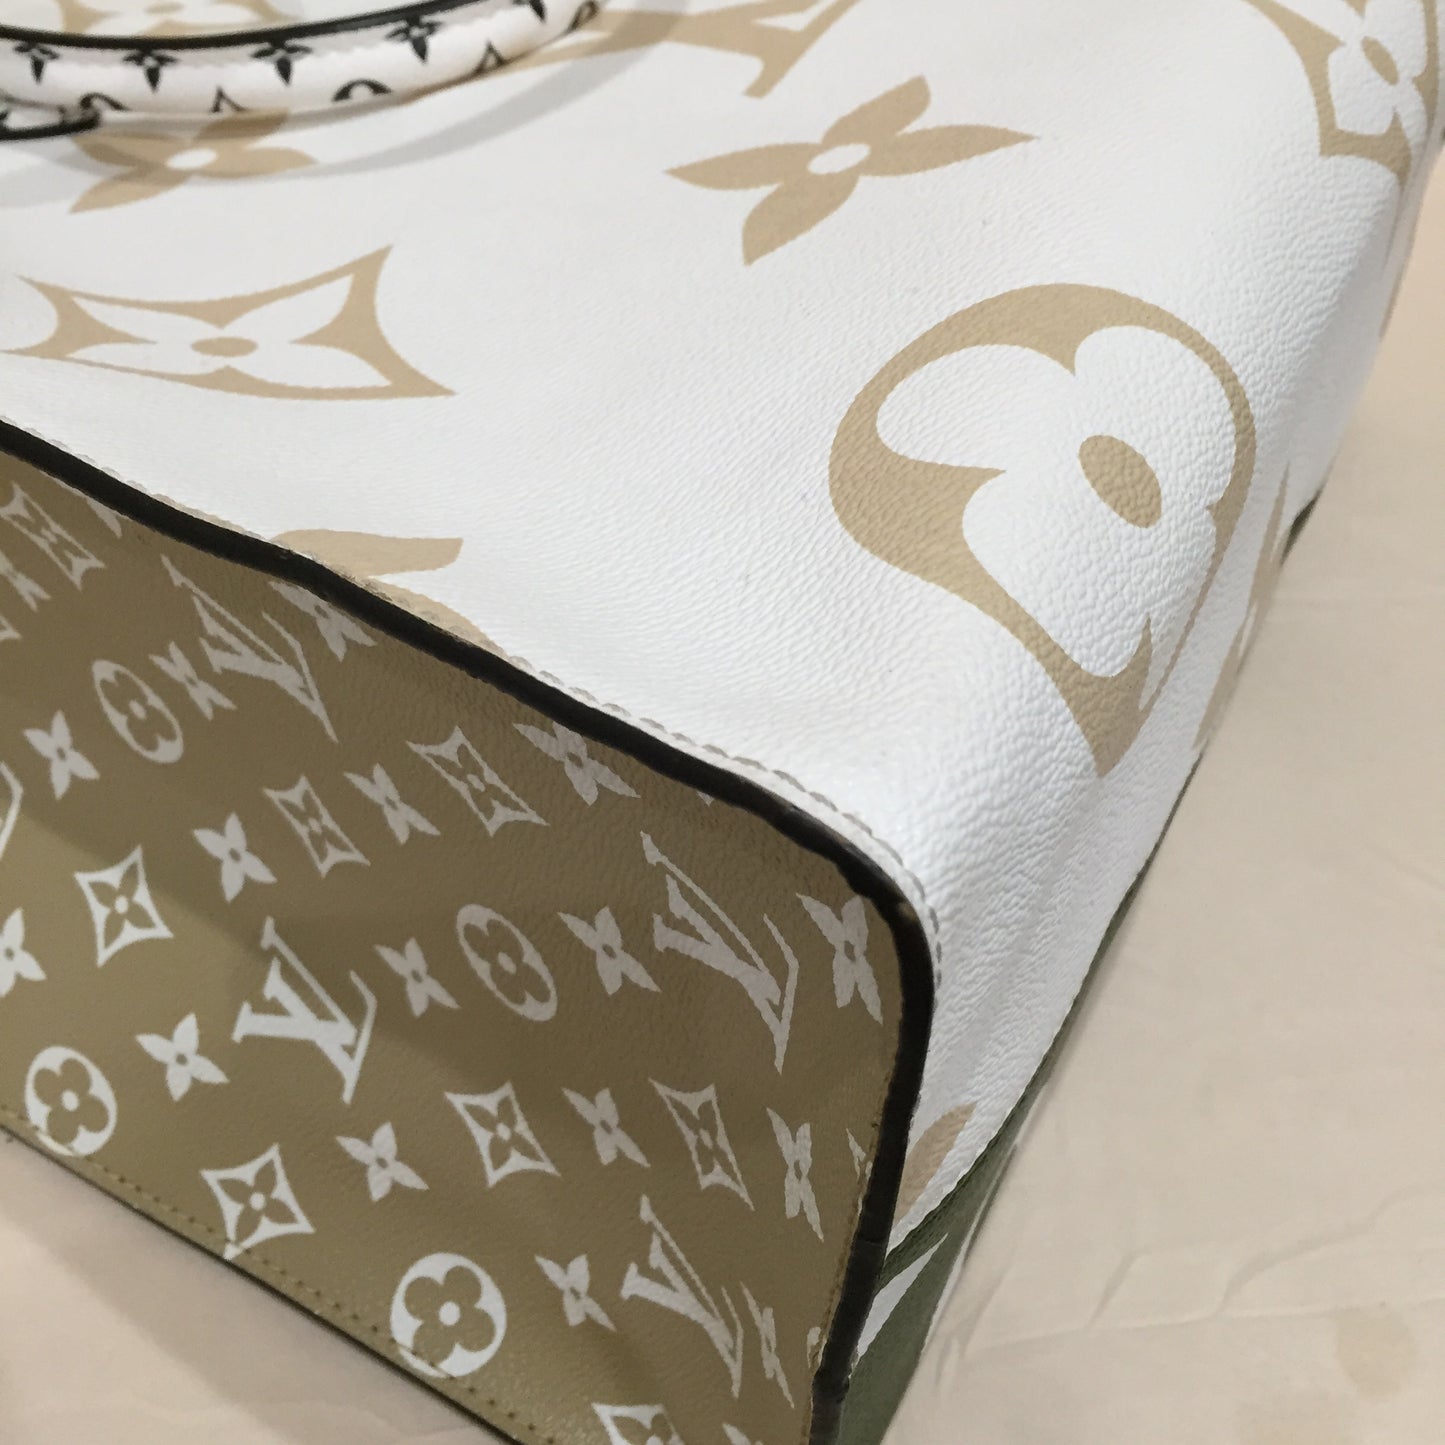 Louis Vuitton White Green Monogram Coated Canvas Giant Onthego GM Tote Sku# 72011